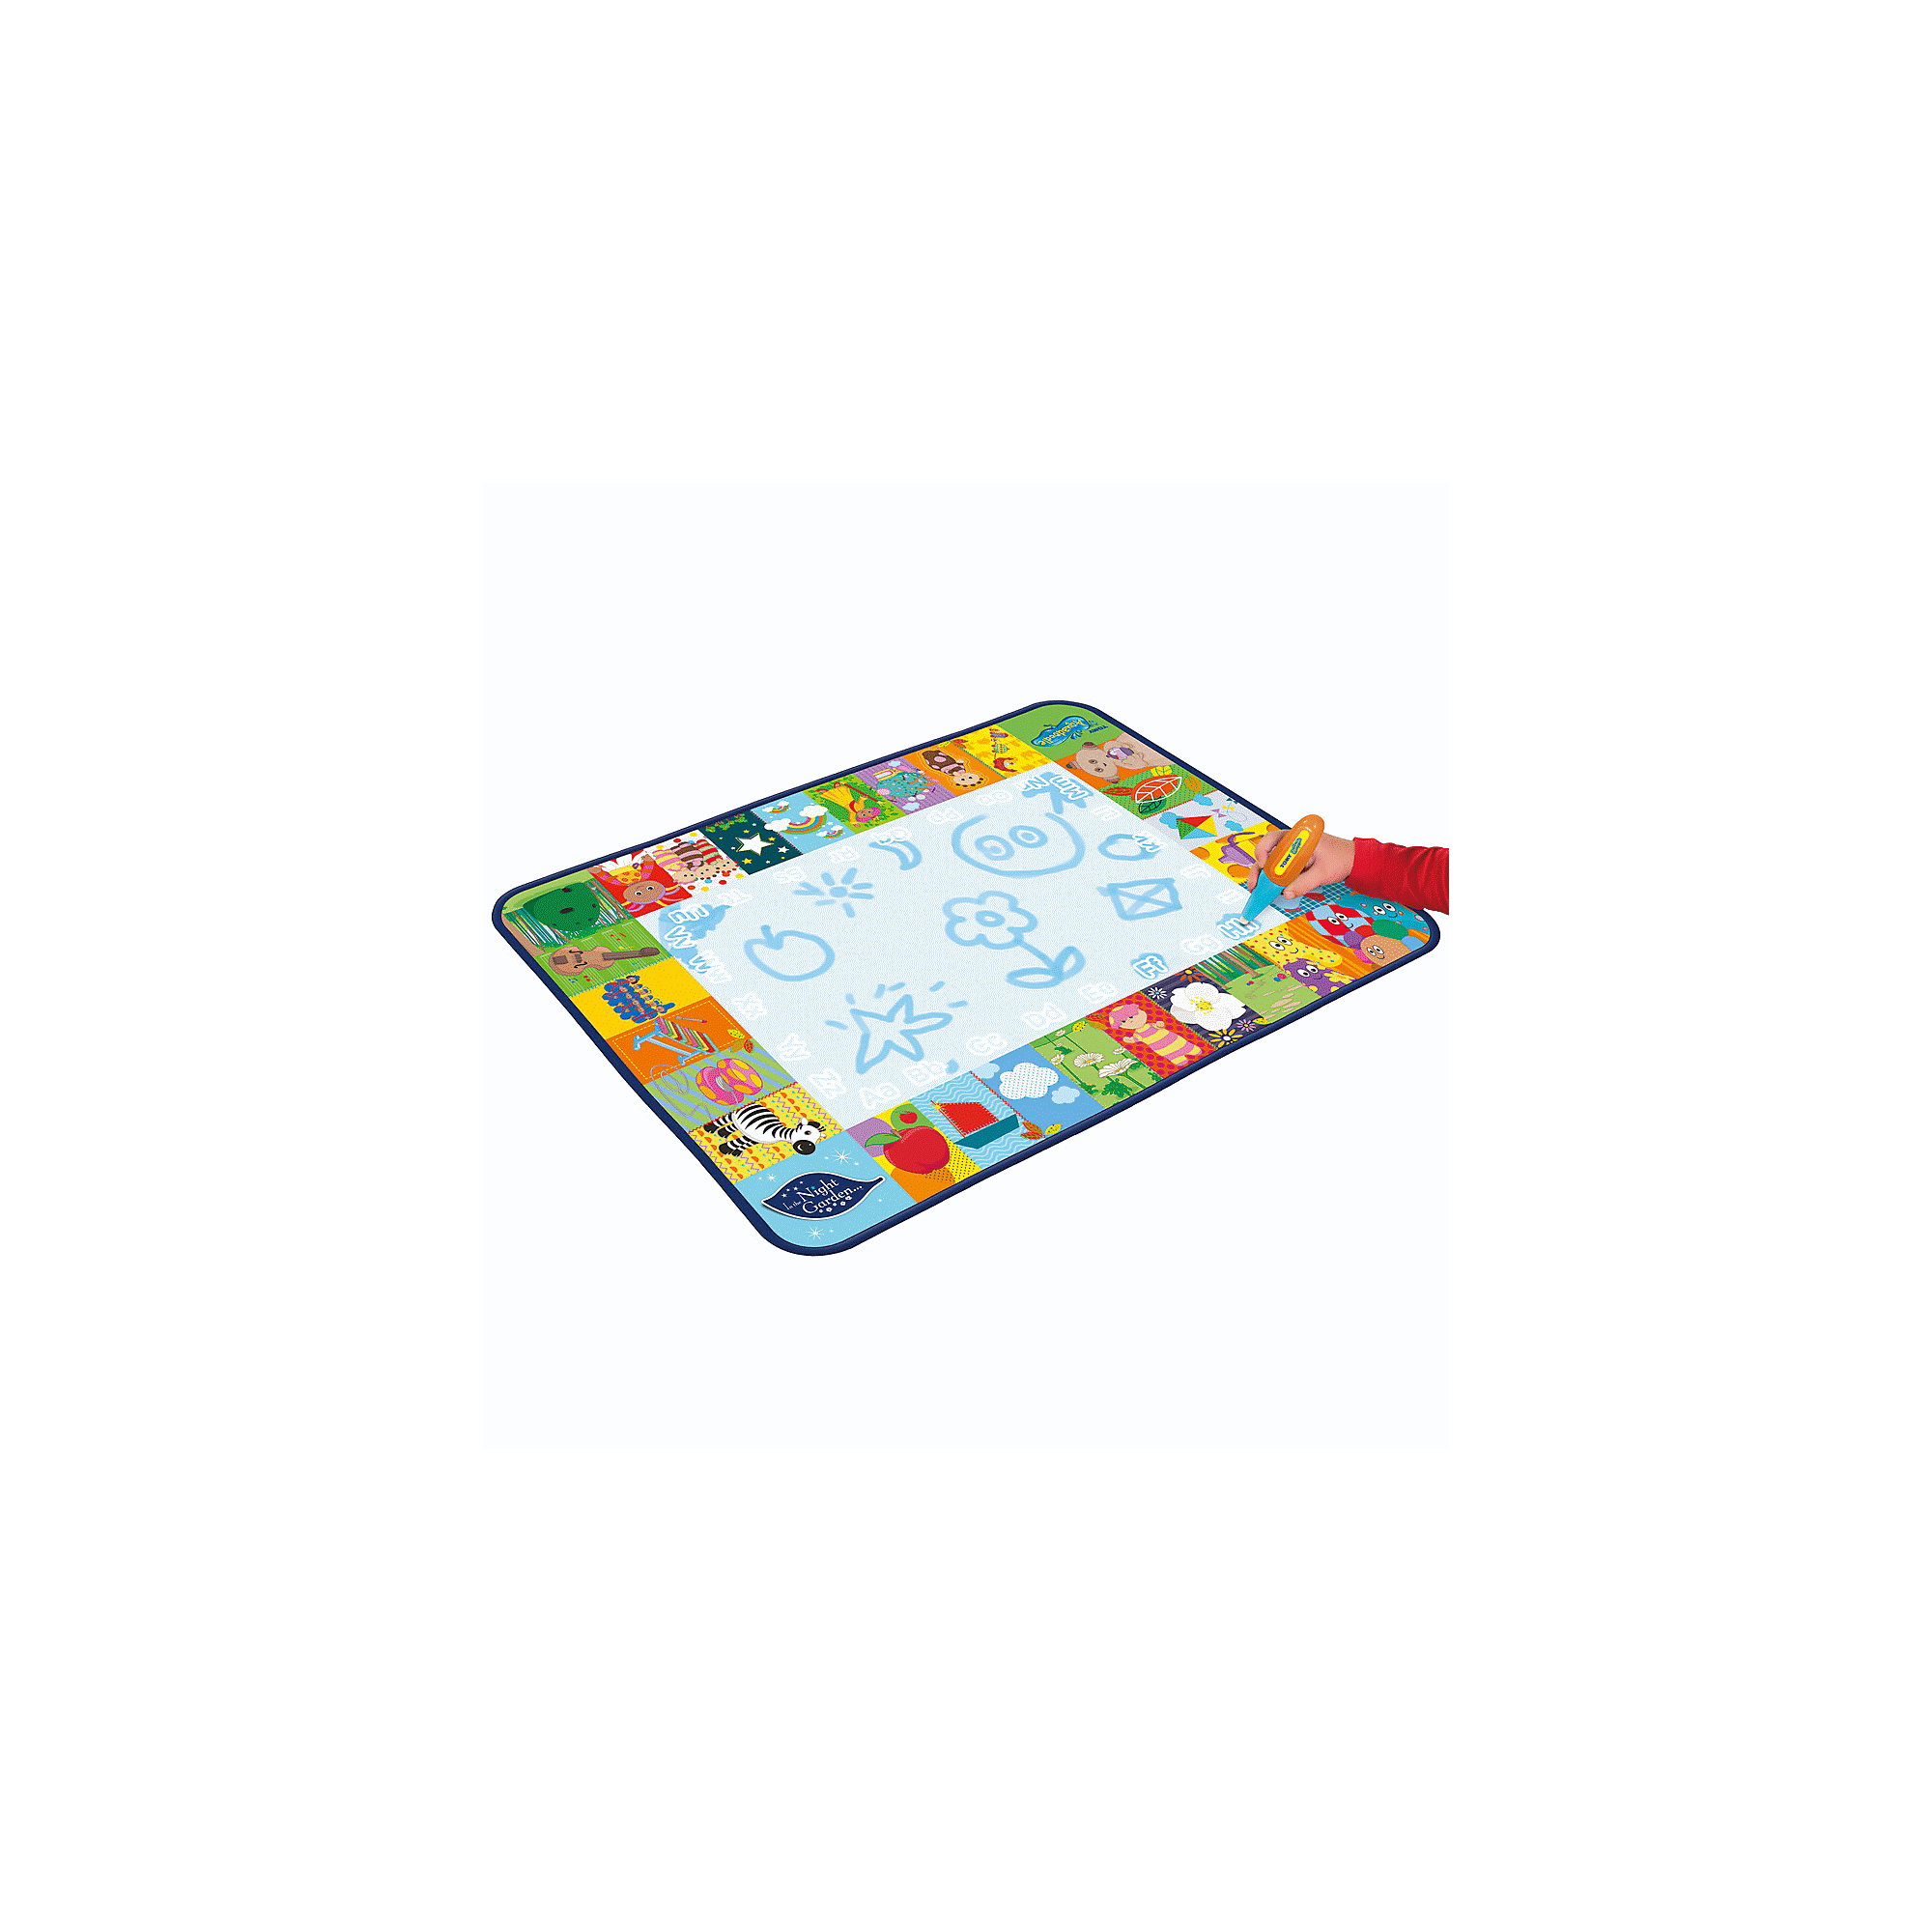 Tomy Aqua Doodle Classic Drawing Toy for £11.99 (40% Off)